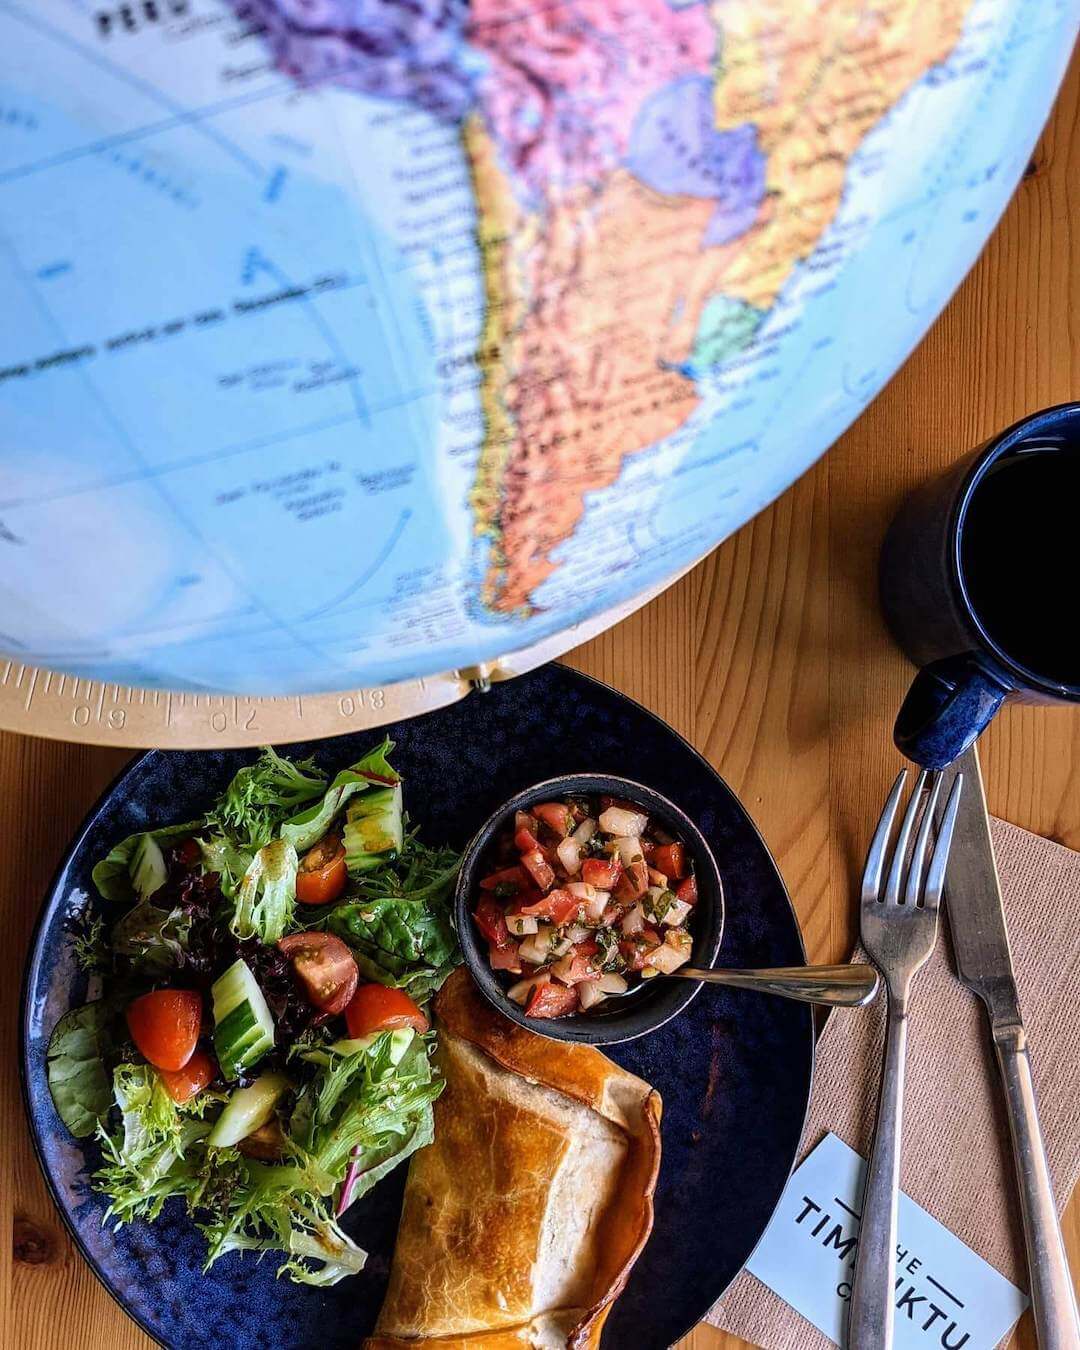 The Timbuktu cafe menu is inspired by cuisines from around the world. There are fantastic meals for brunch in Melbourne, best breakfast options and more.